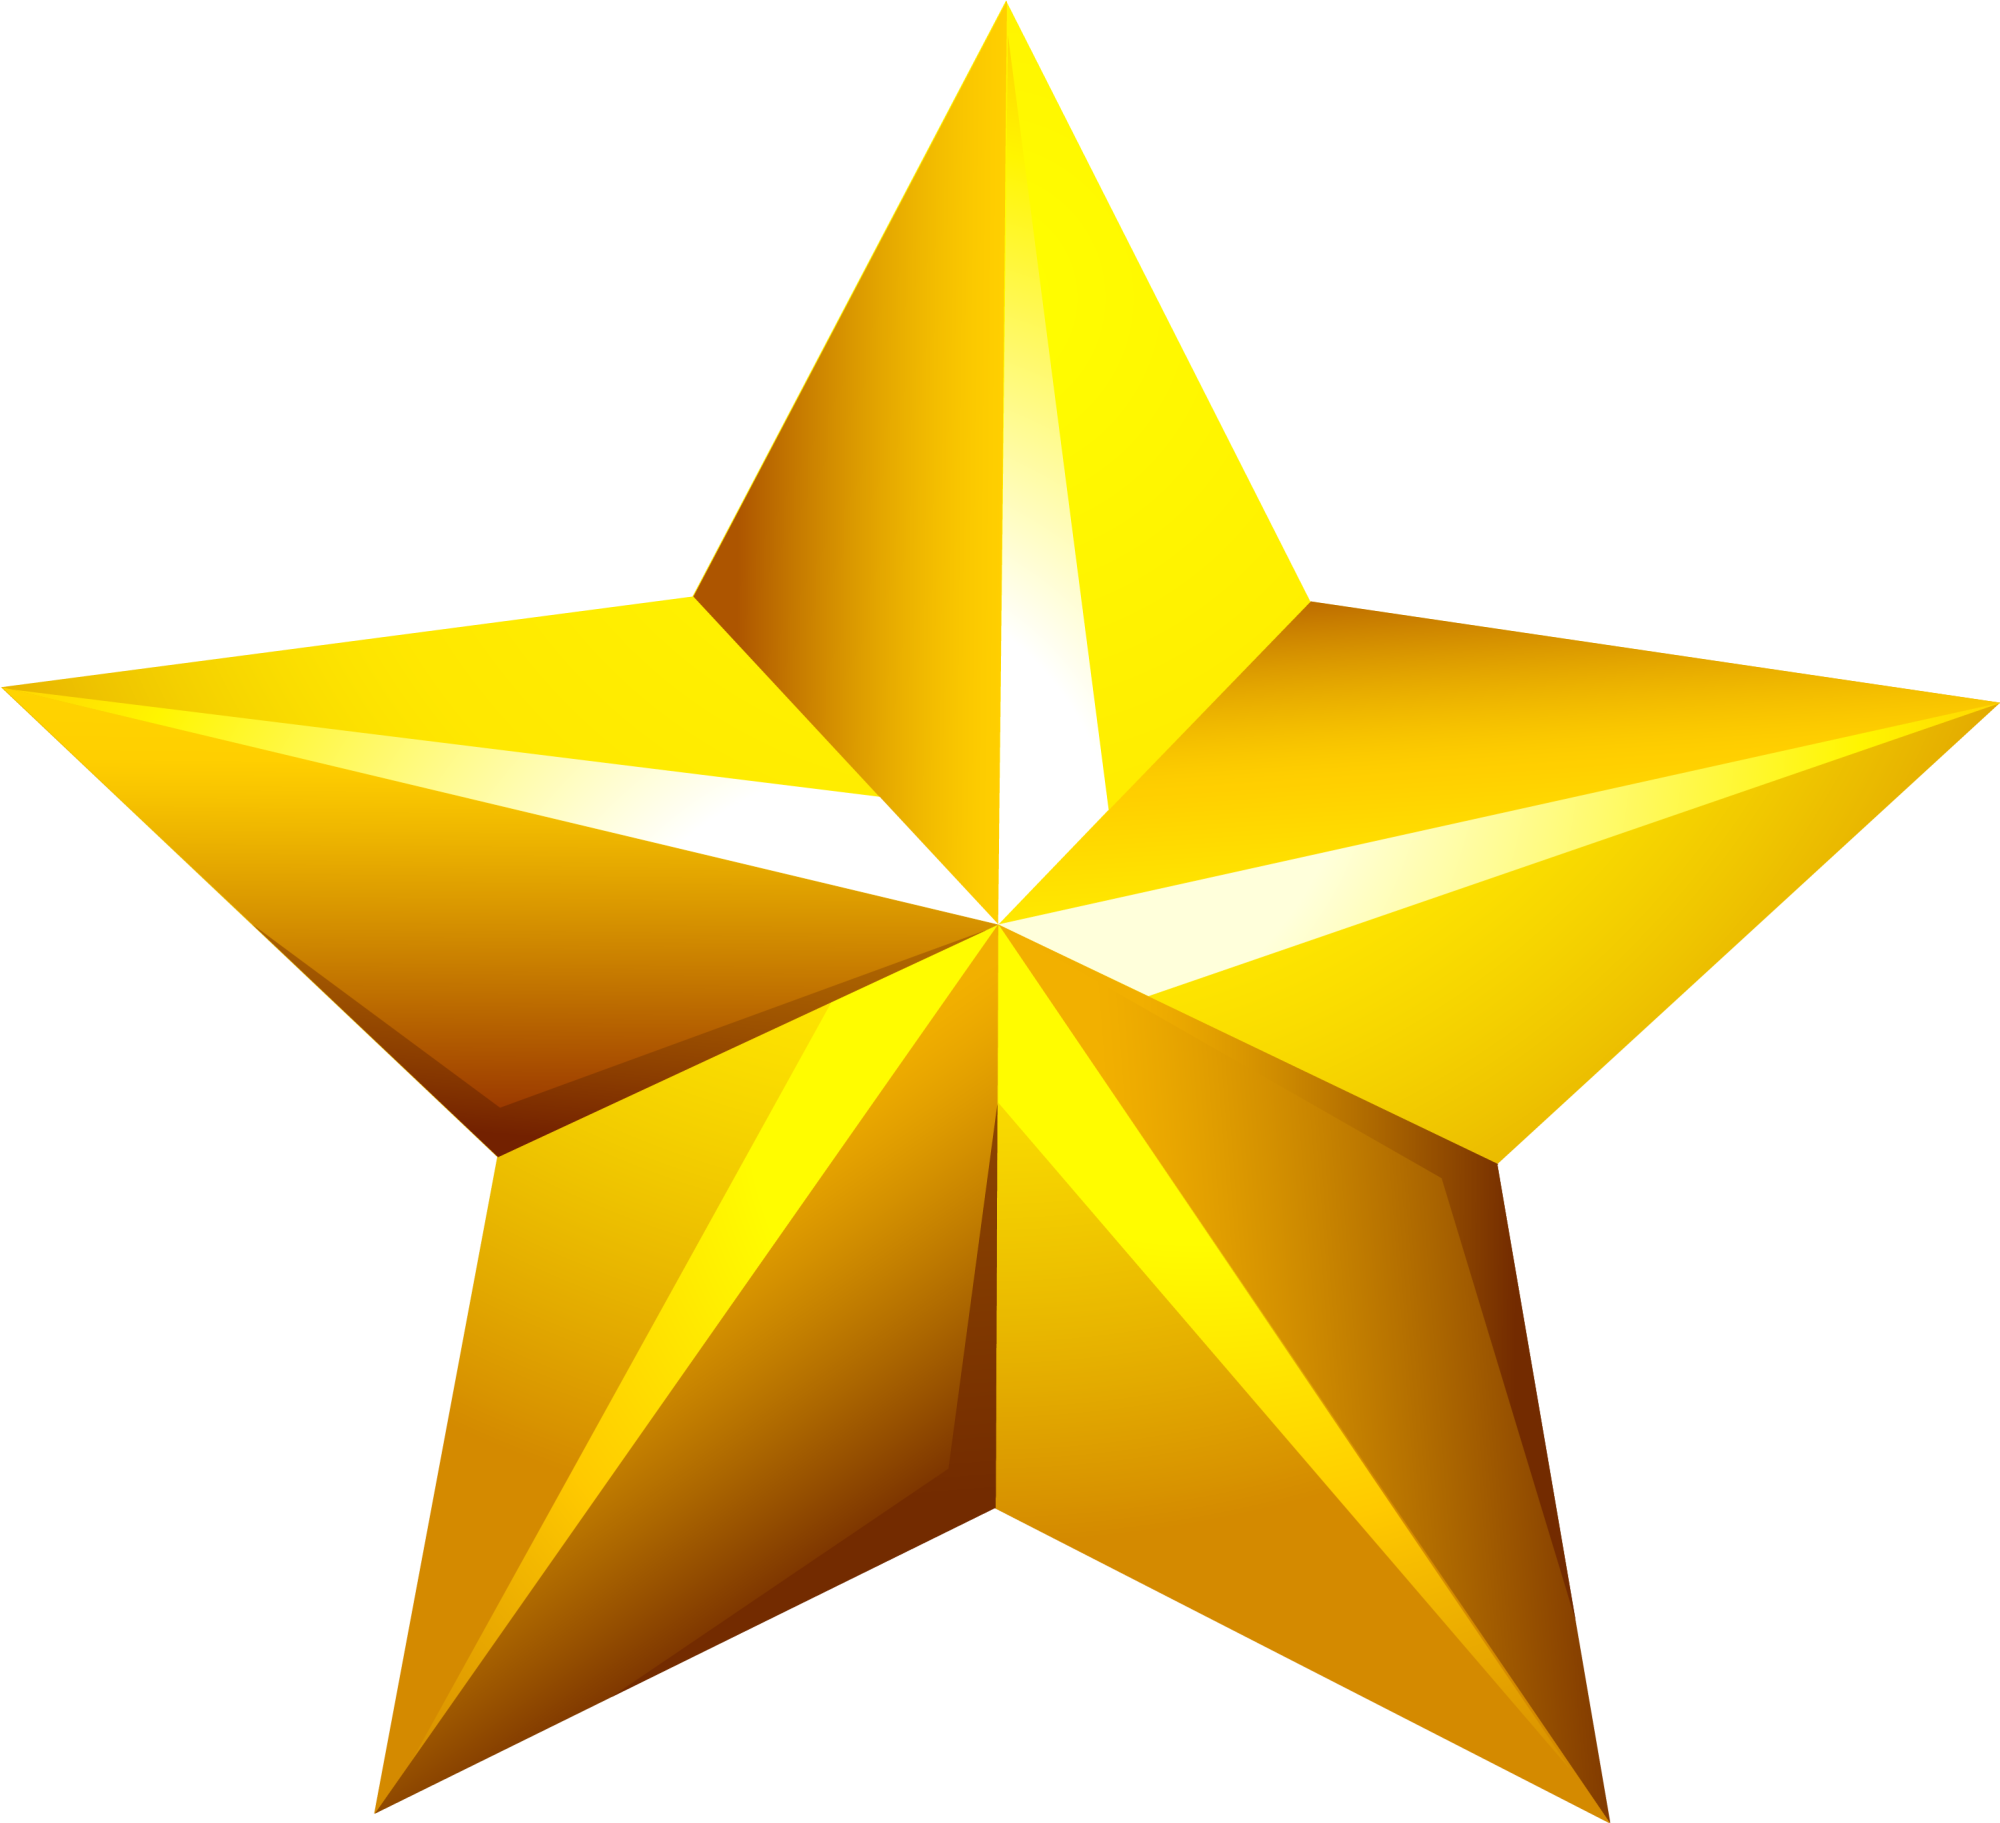 Artistic Quality Heading Asterisk Star PNG